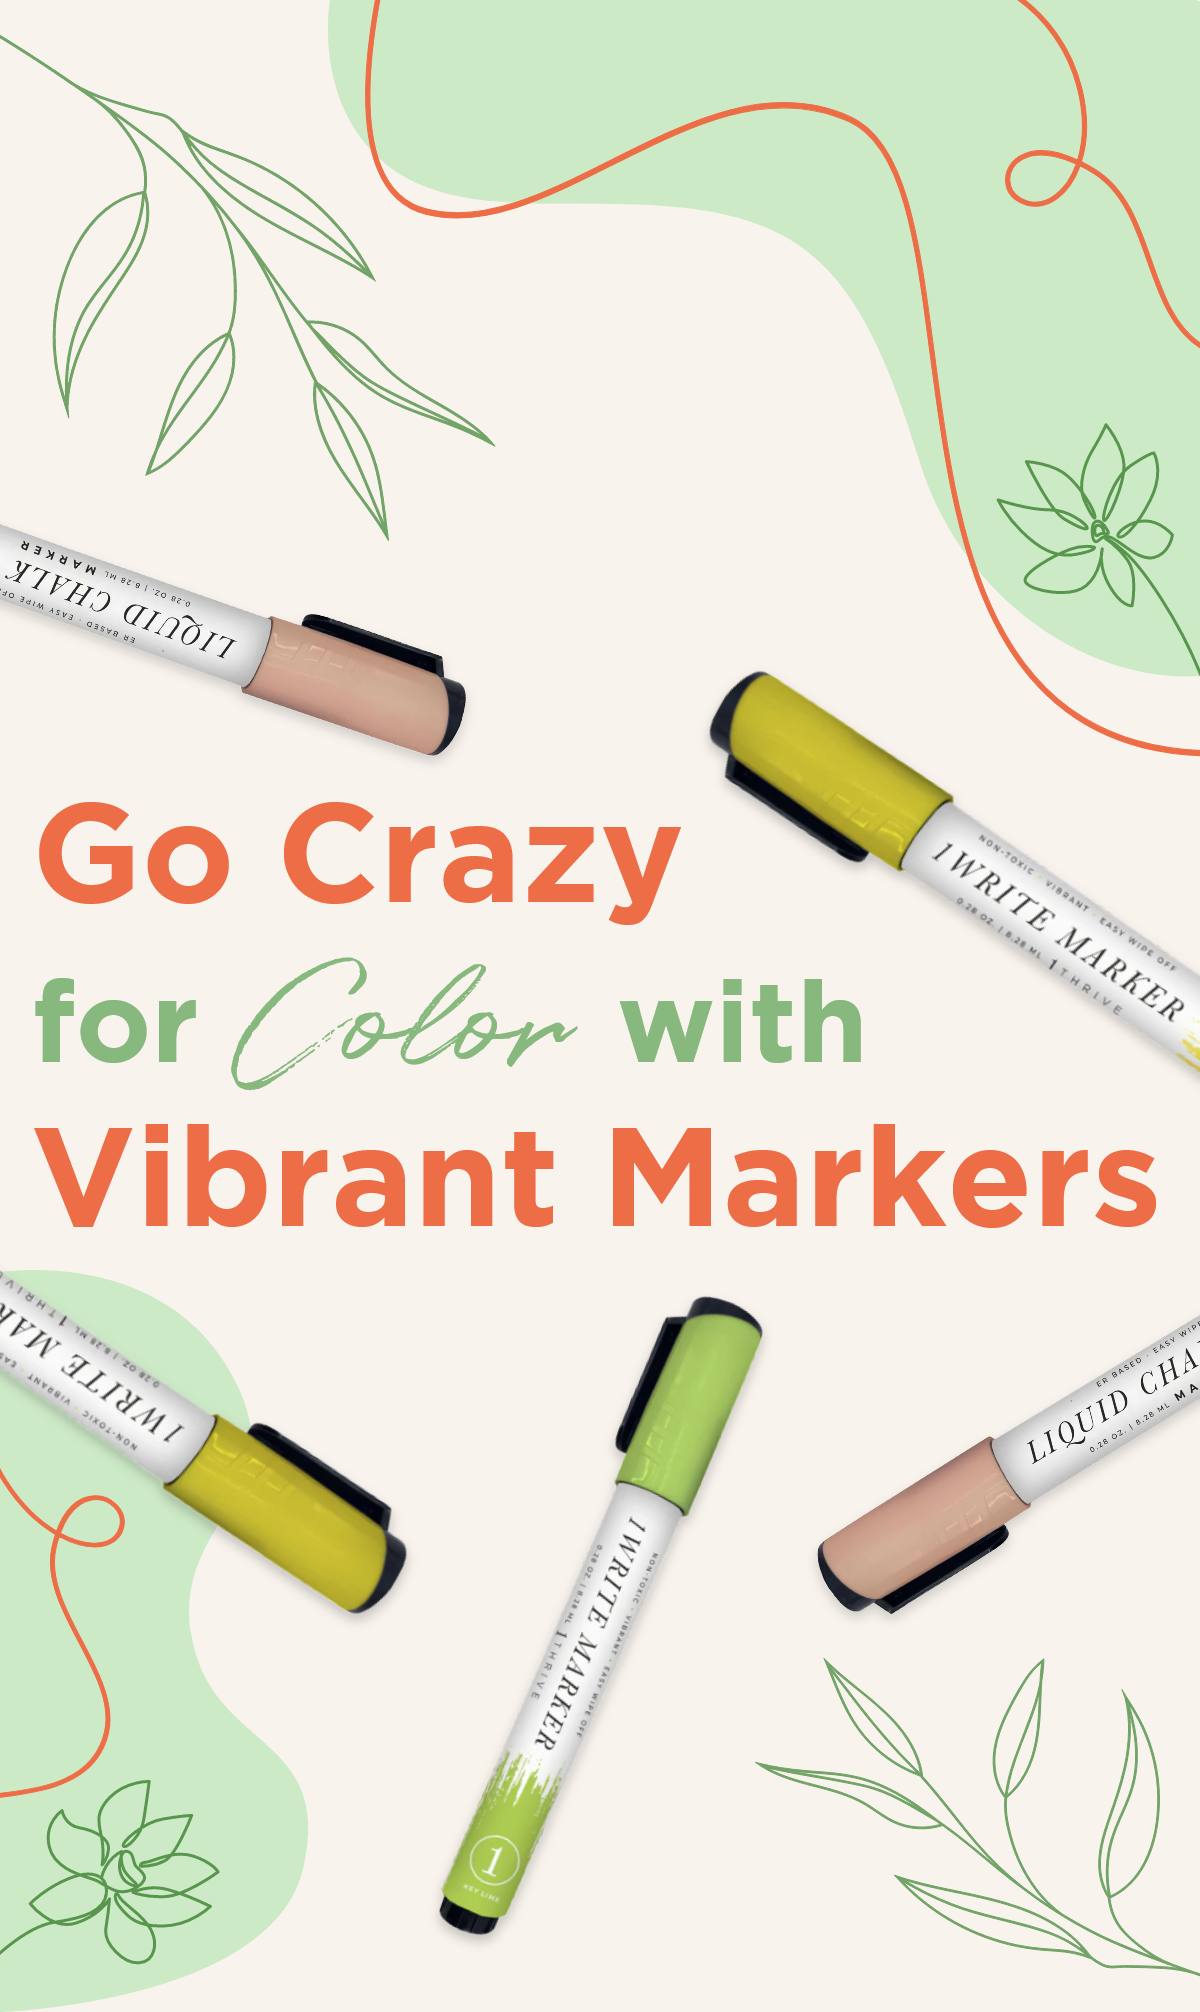 Go Crazy for Color with Vibrant Markers